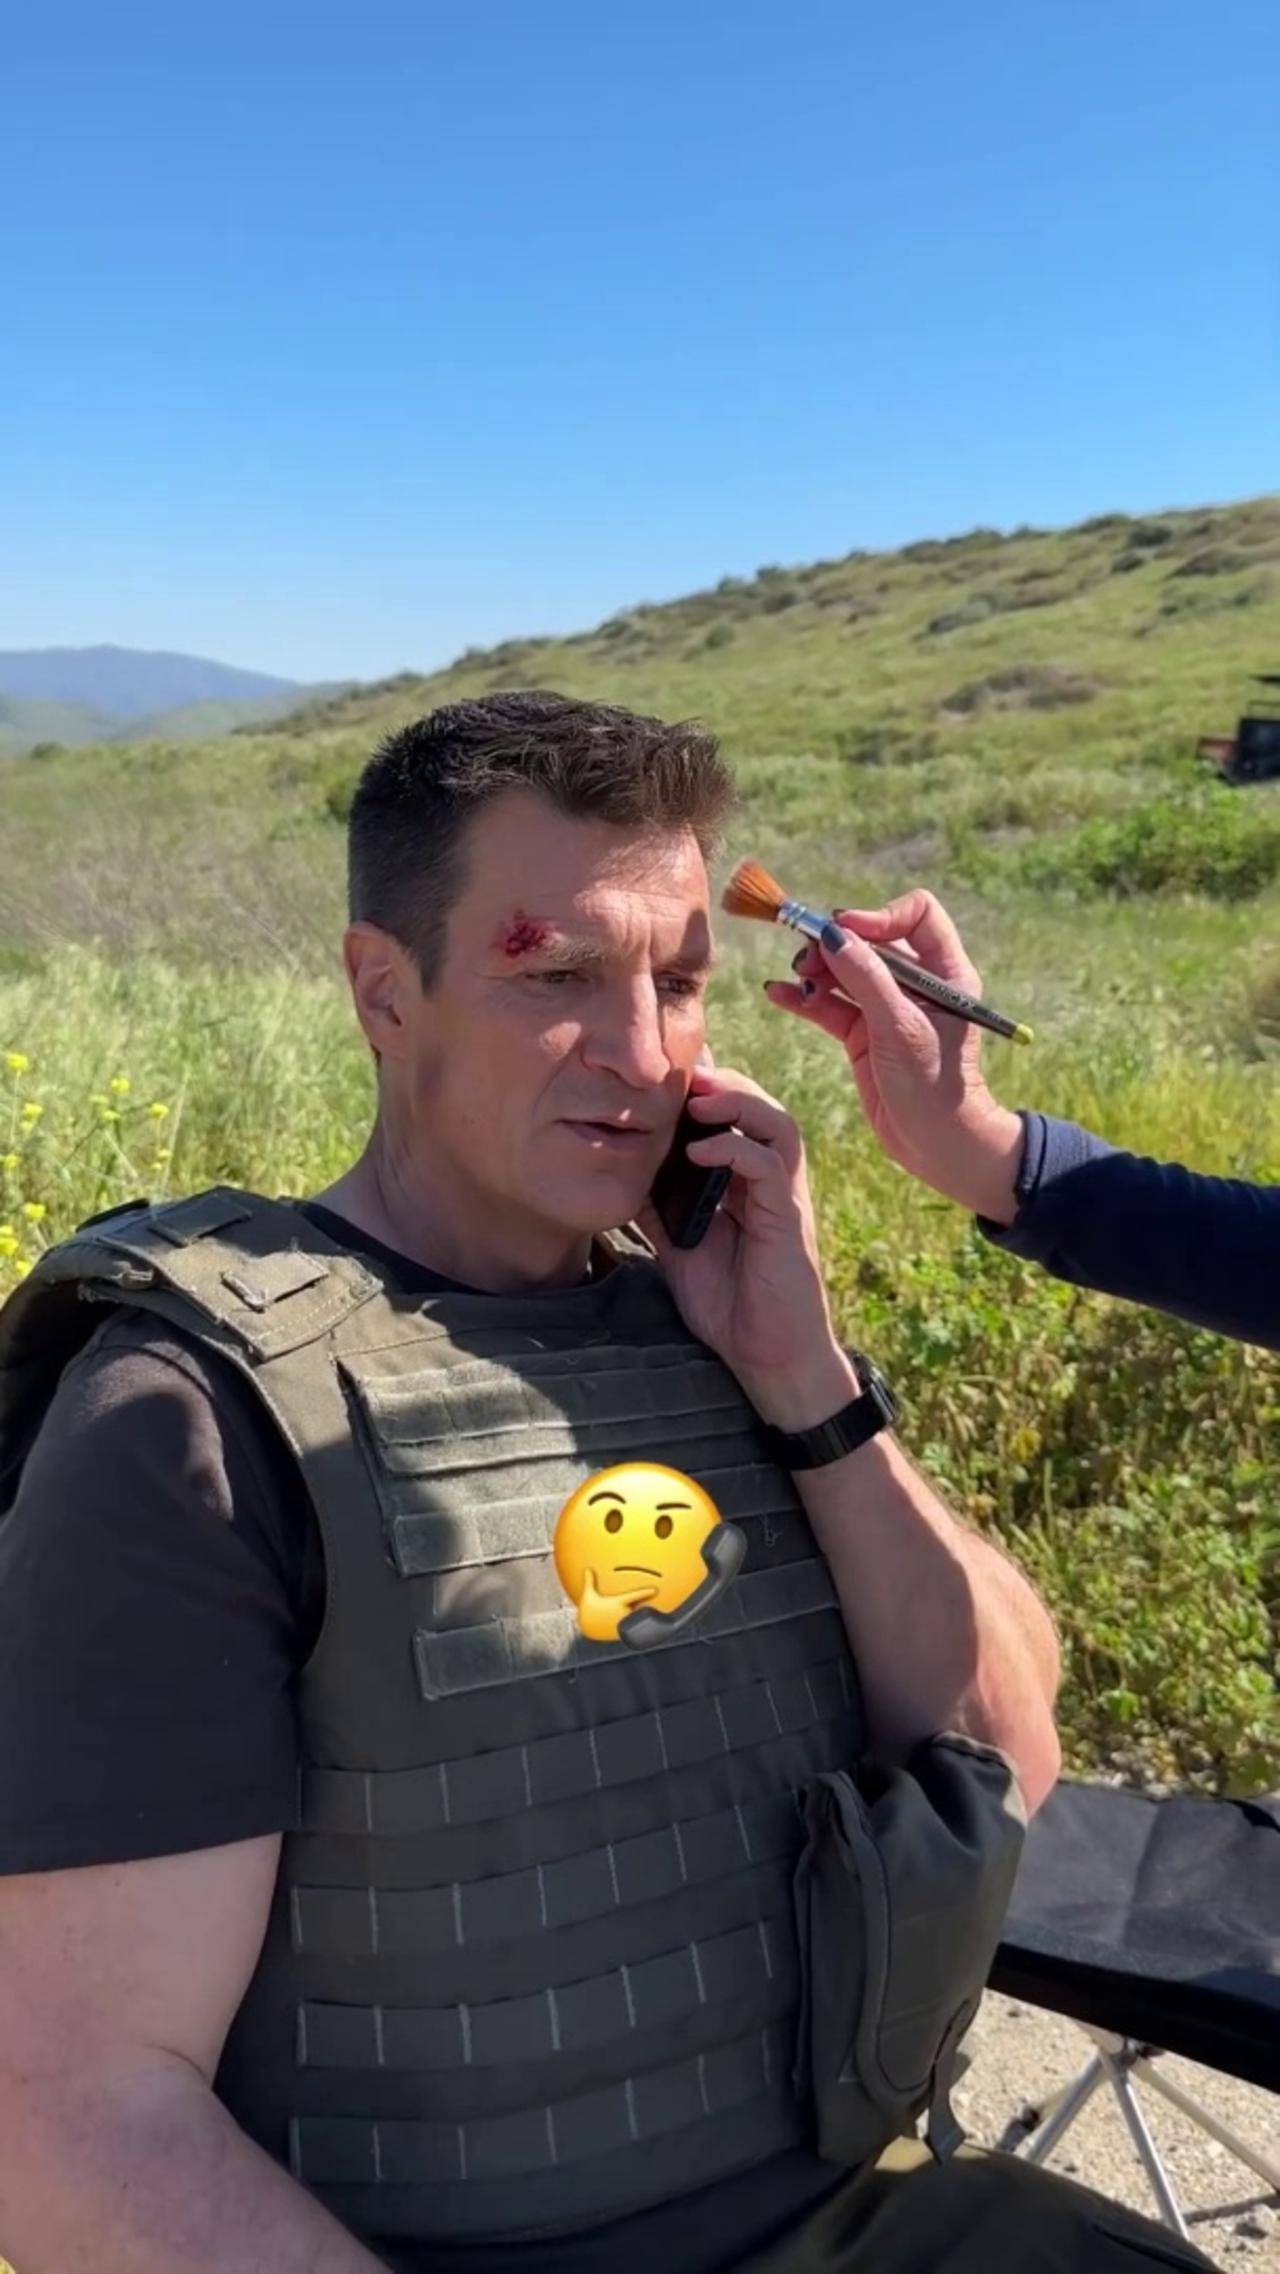 Nathan Fillion Brings the Laughs on ABC's The Rookie